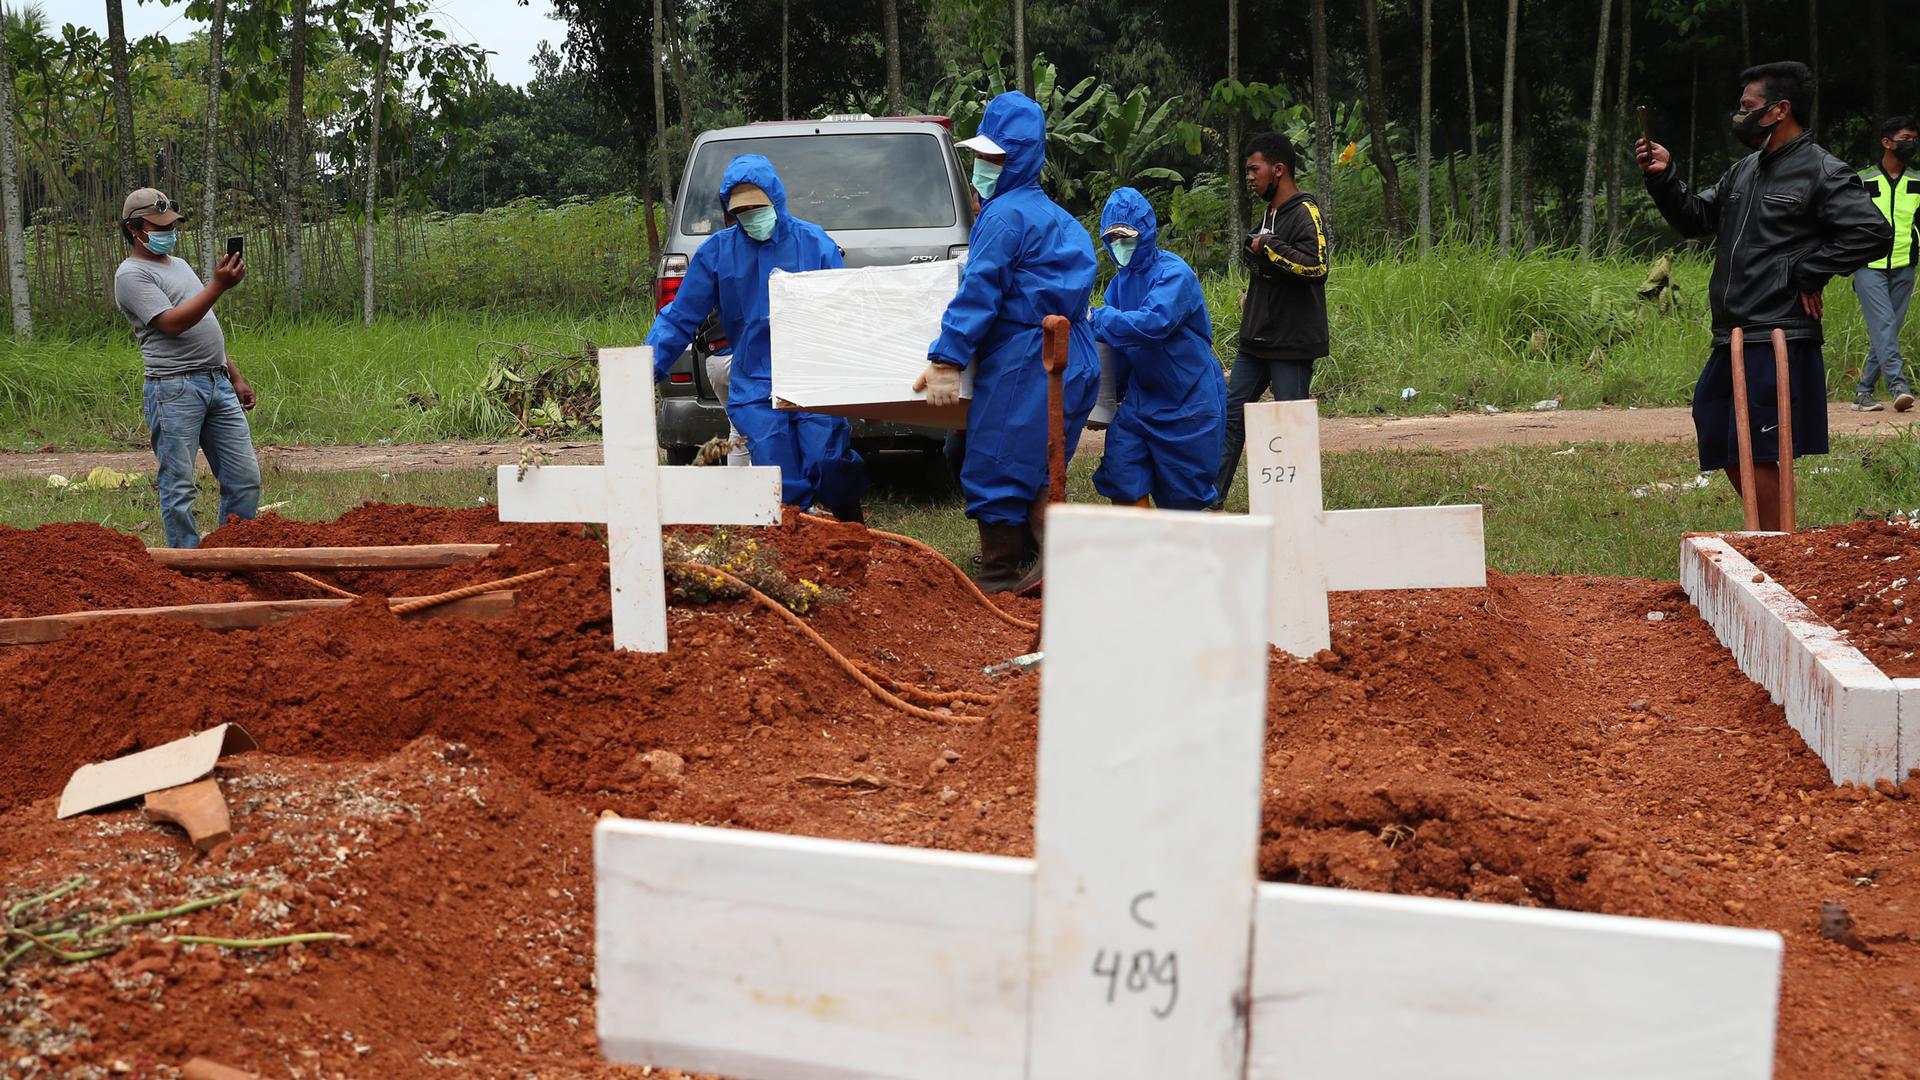 Several workers are shown wearing blue protective suits and carrying a white coffin while walking in at a grave site with several white crosses.